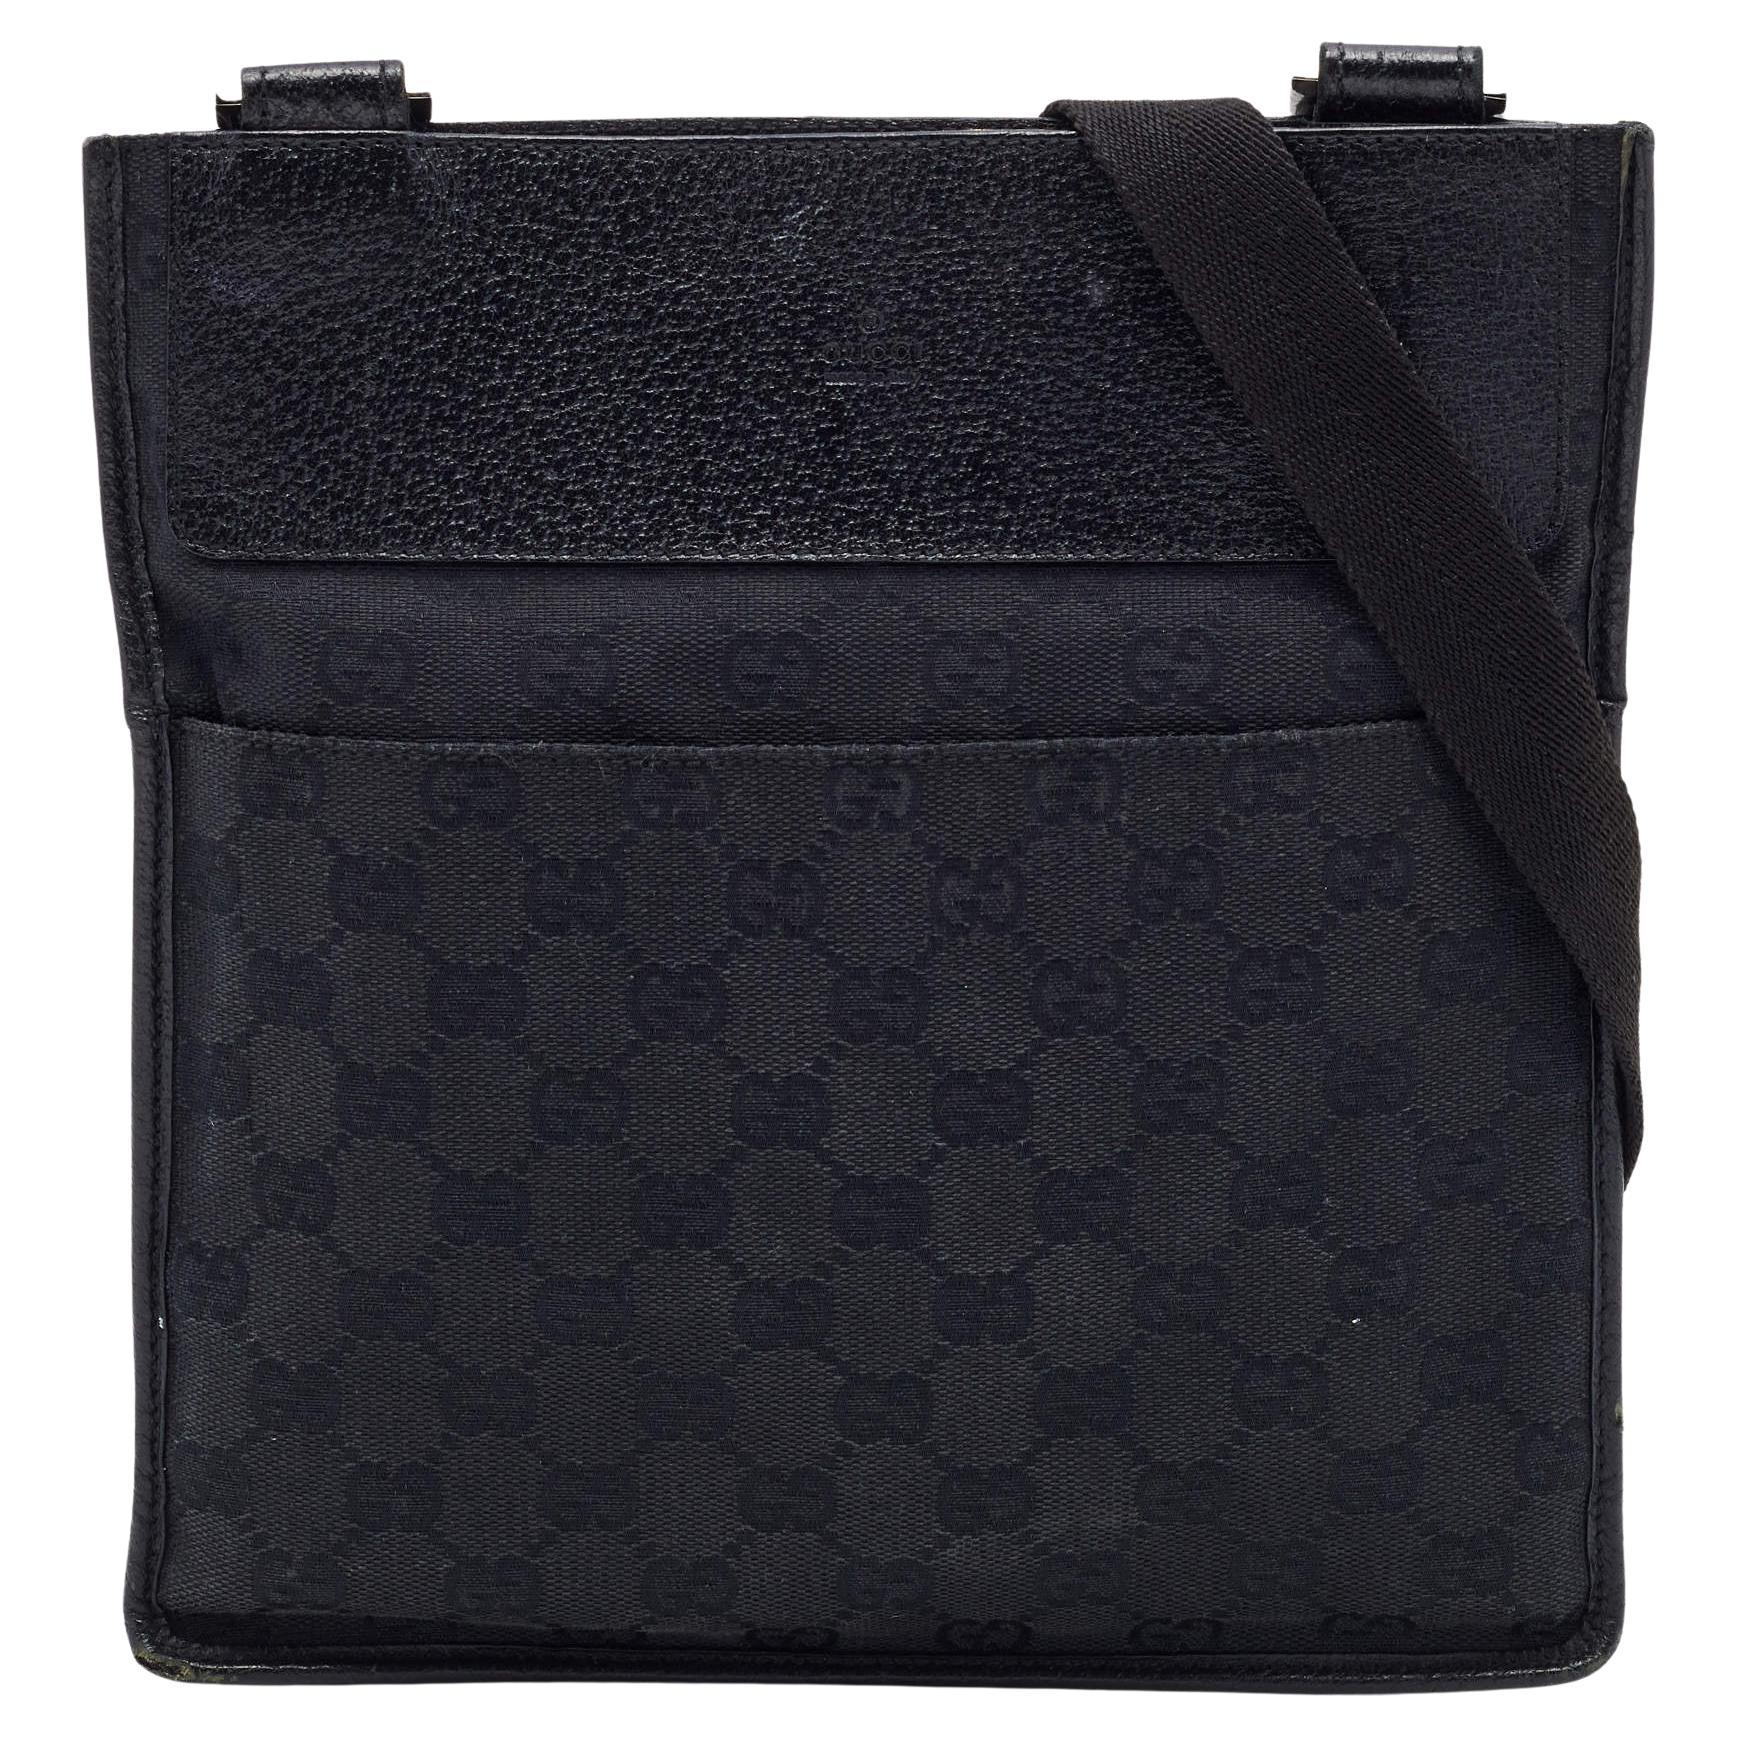 Gucci Black GG Canvas And Leather Flat Messenger Bag